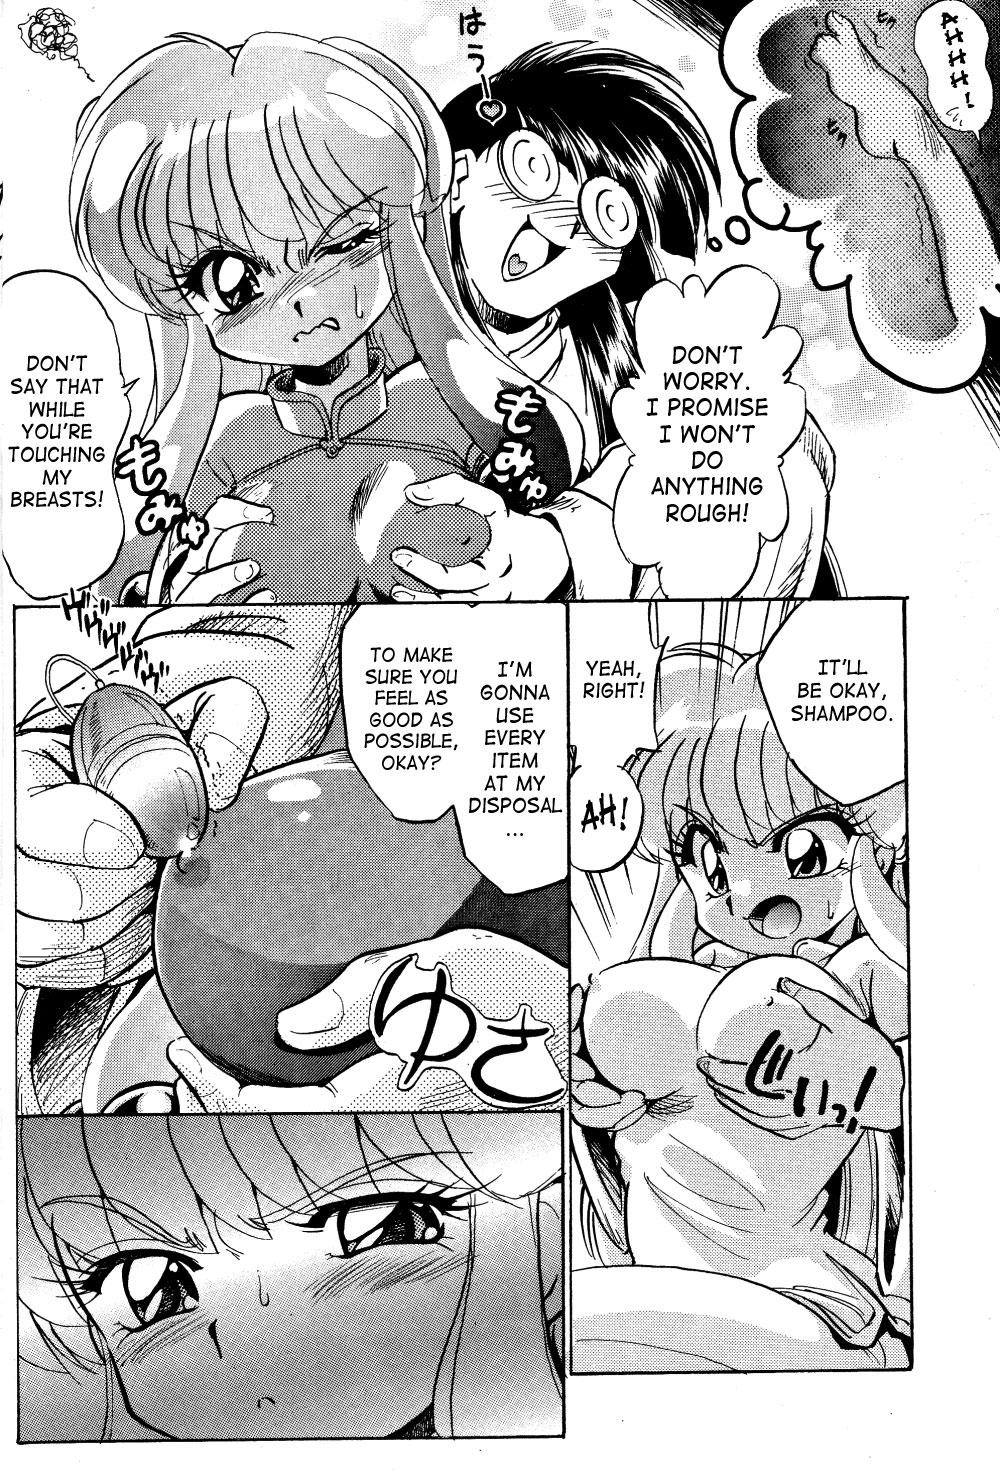 Chicks Annojyou - Ranma 12 First - Page 9